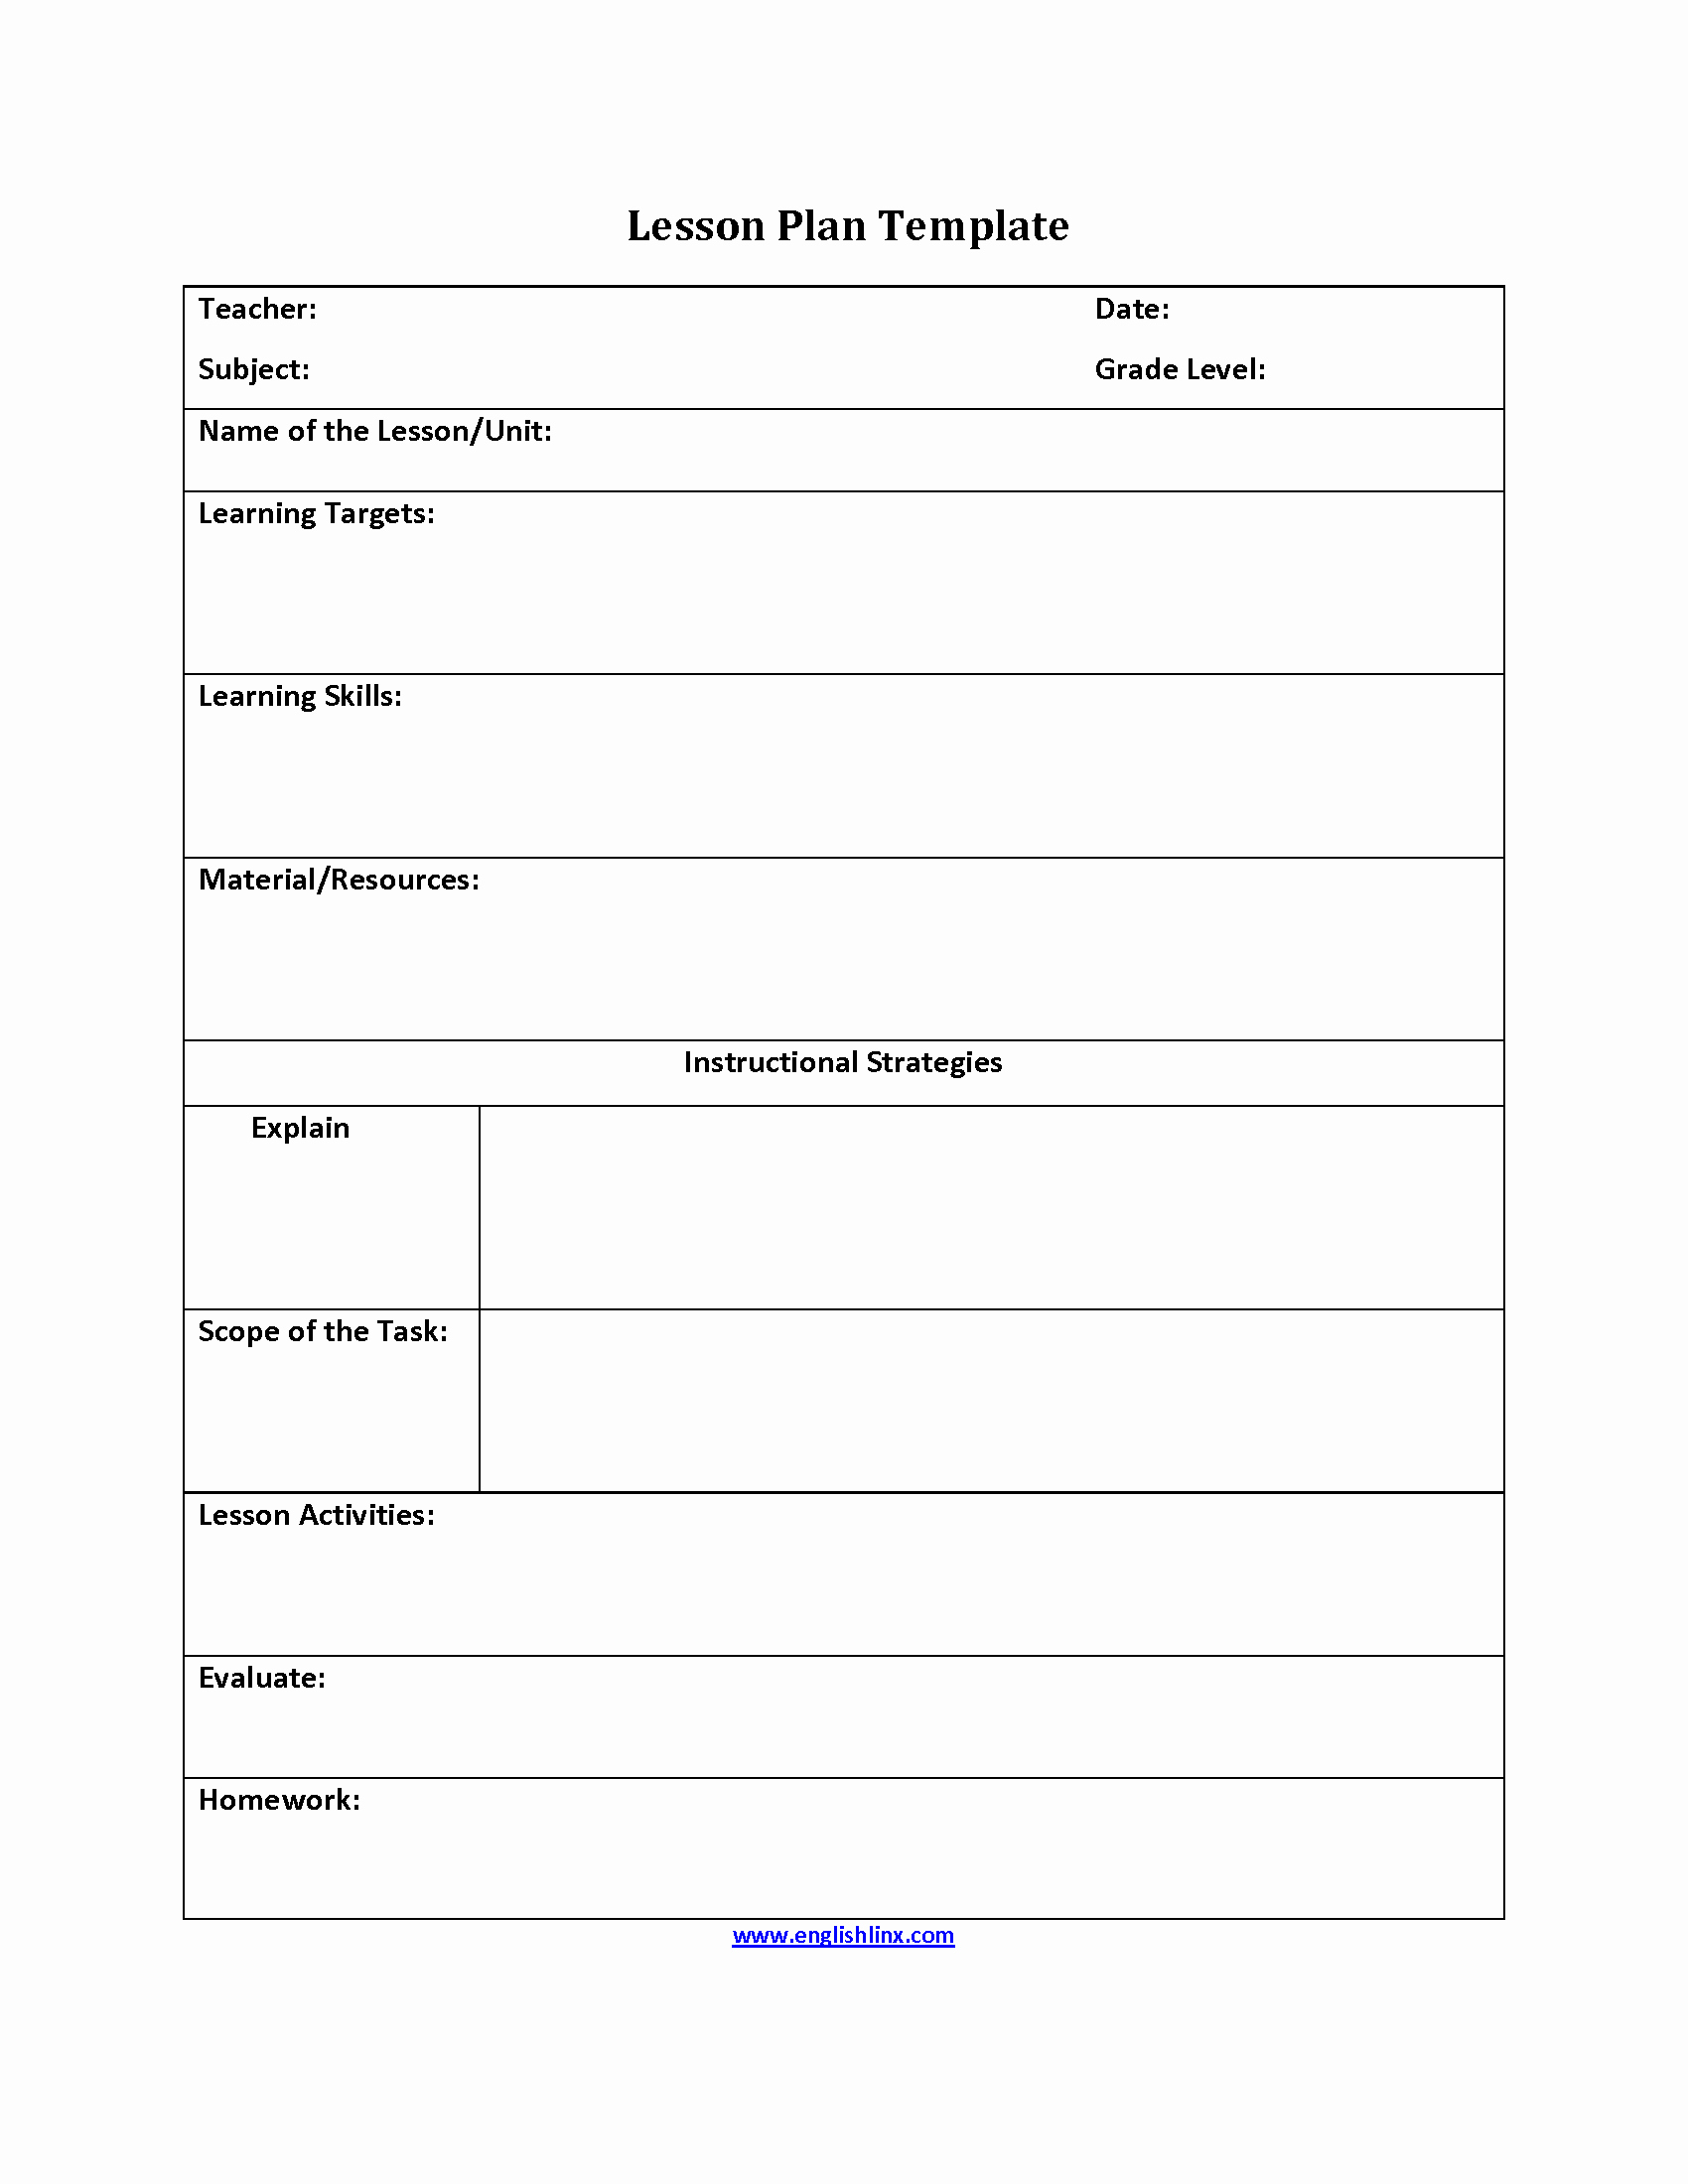 Elementary Art Lesson Plan Template Beautiful What is Lesson Plan Template